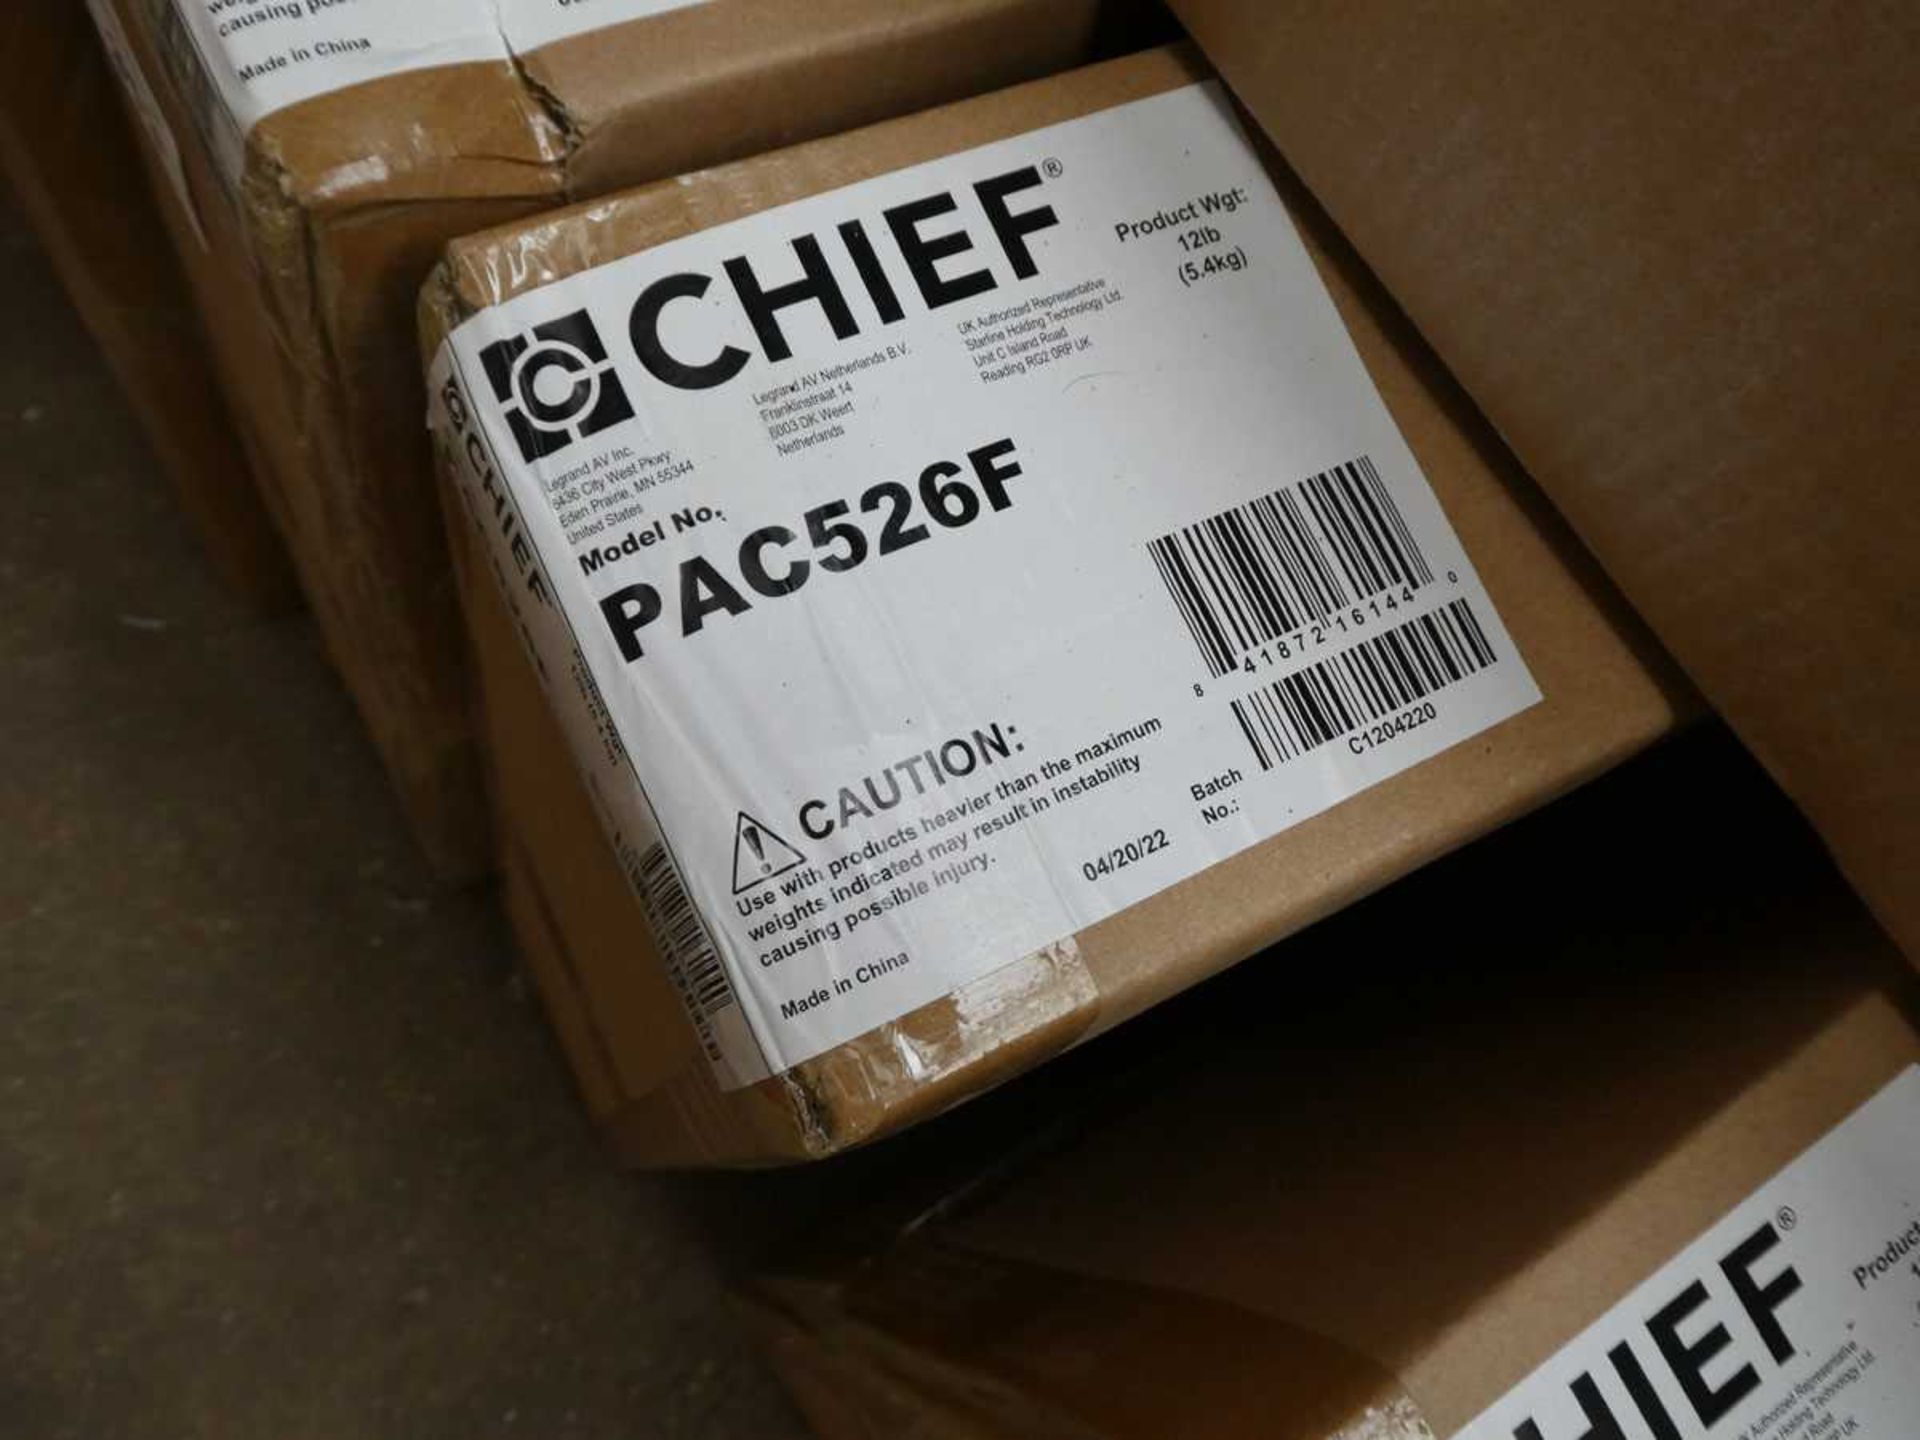 +VAT 2x Chief PAC526F in-wall storage box with flange - Image 2 of 2